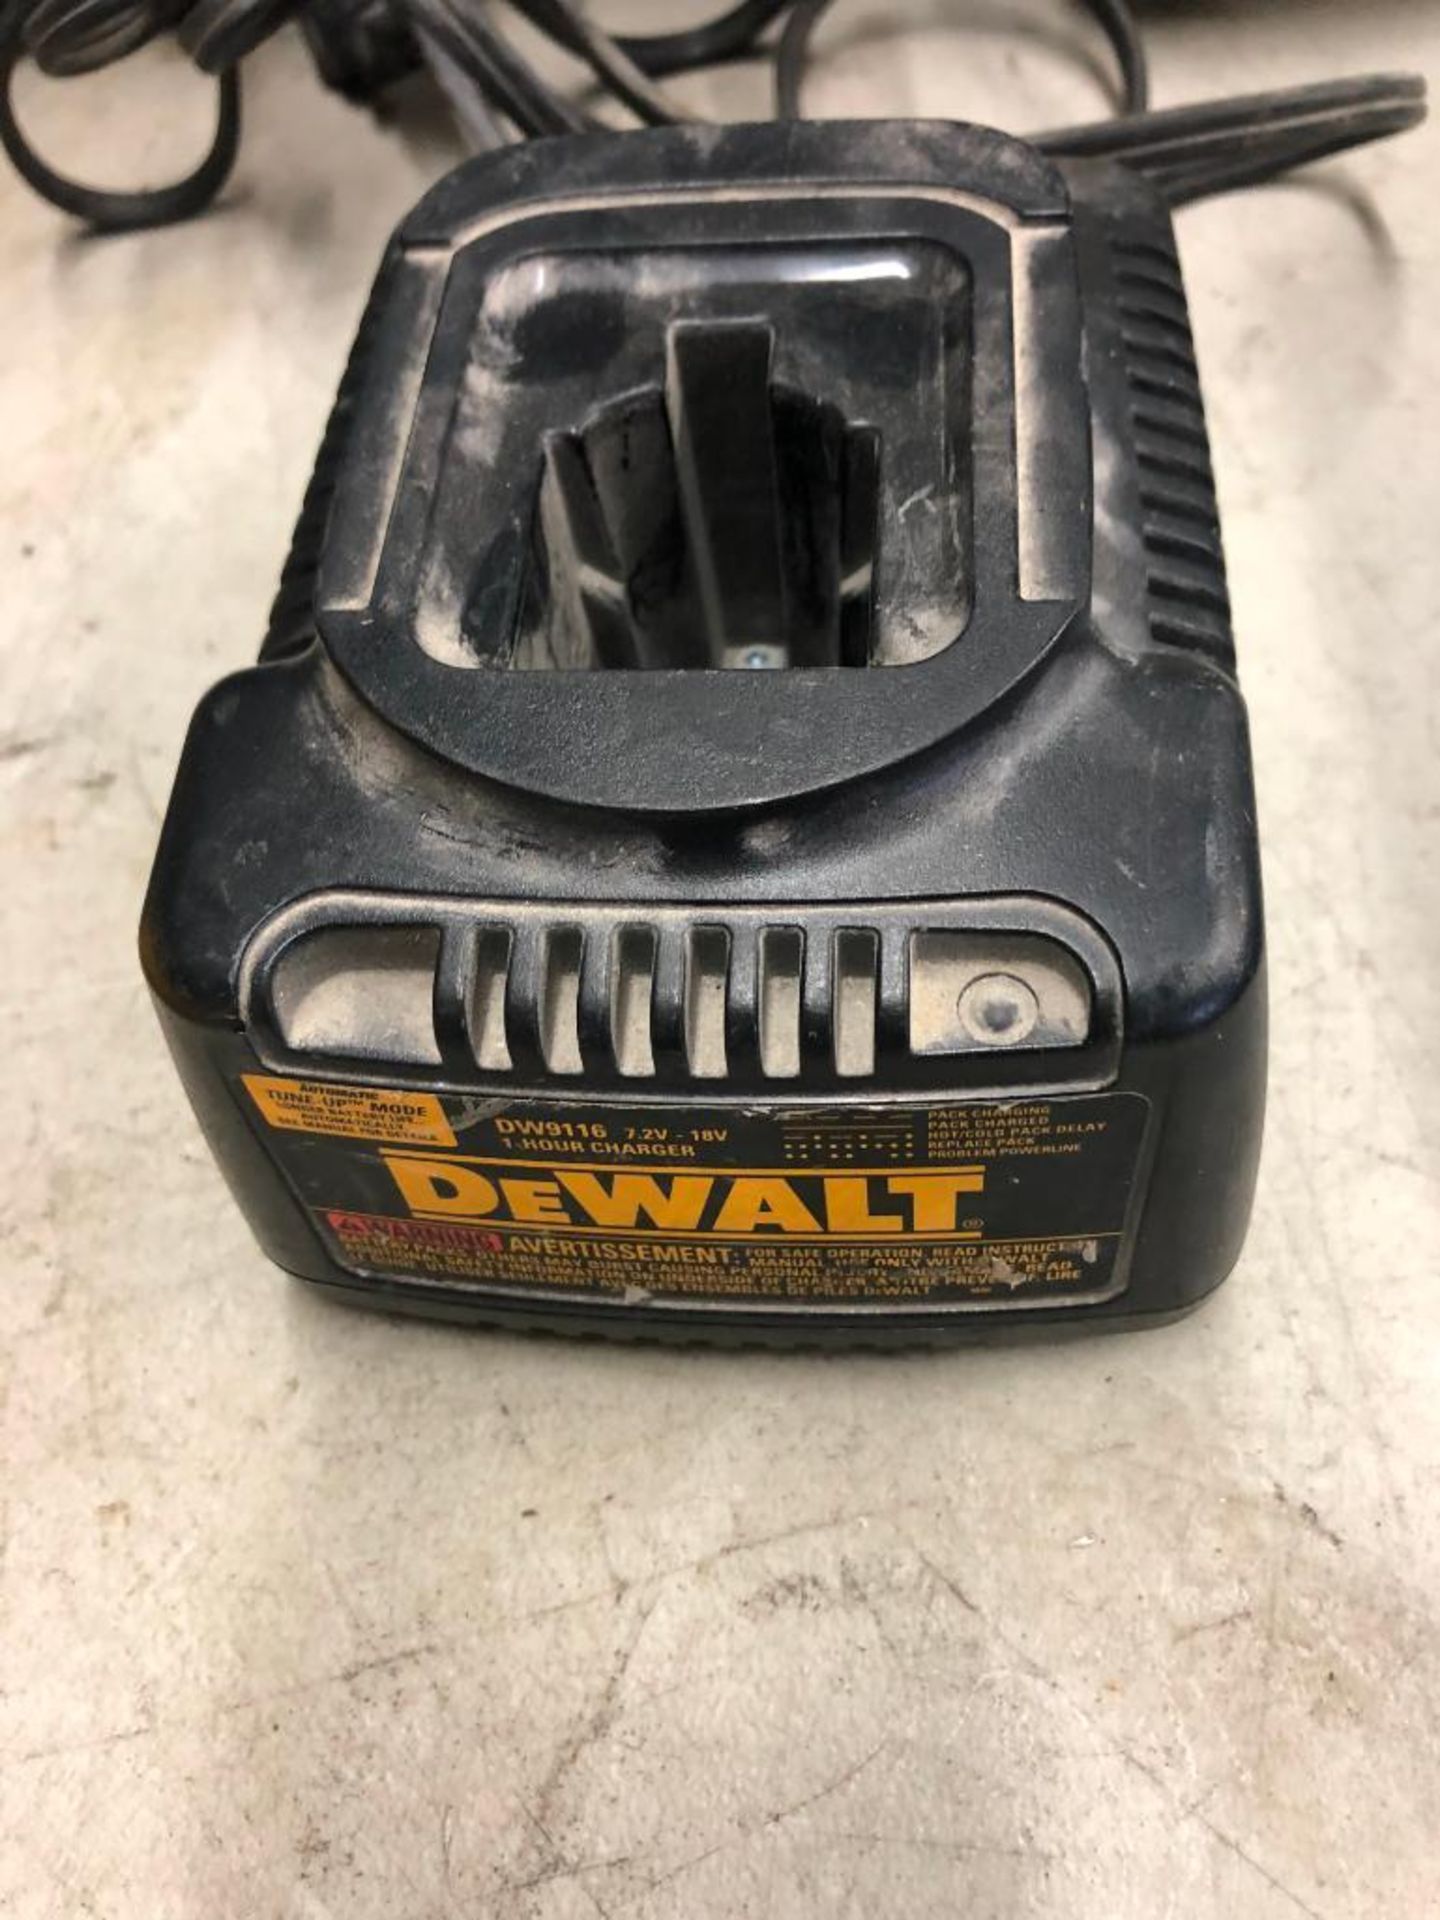 DEWALT CORDLESS 1/4'' HEAVY DUTY CUT-OFF TOOL, MODEL DC411, W/ (1) BATTERY AND CHARGER - Image 2 of 5